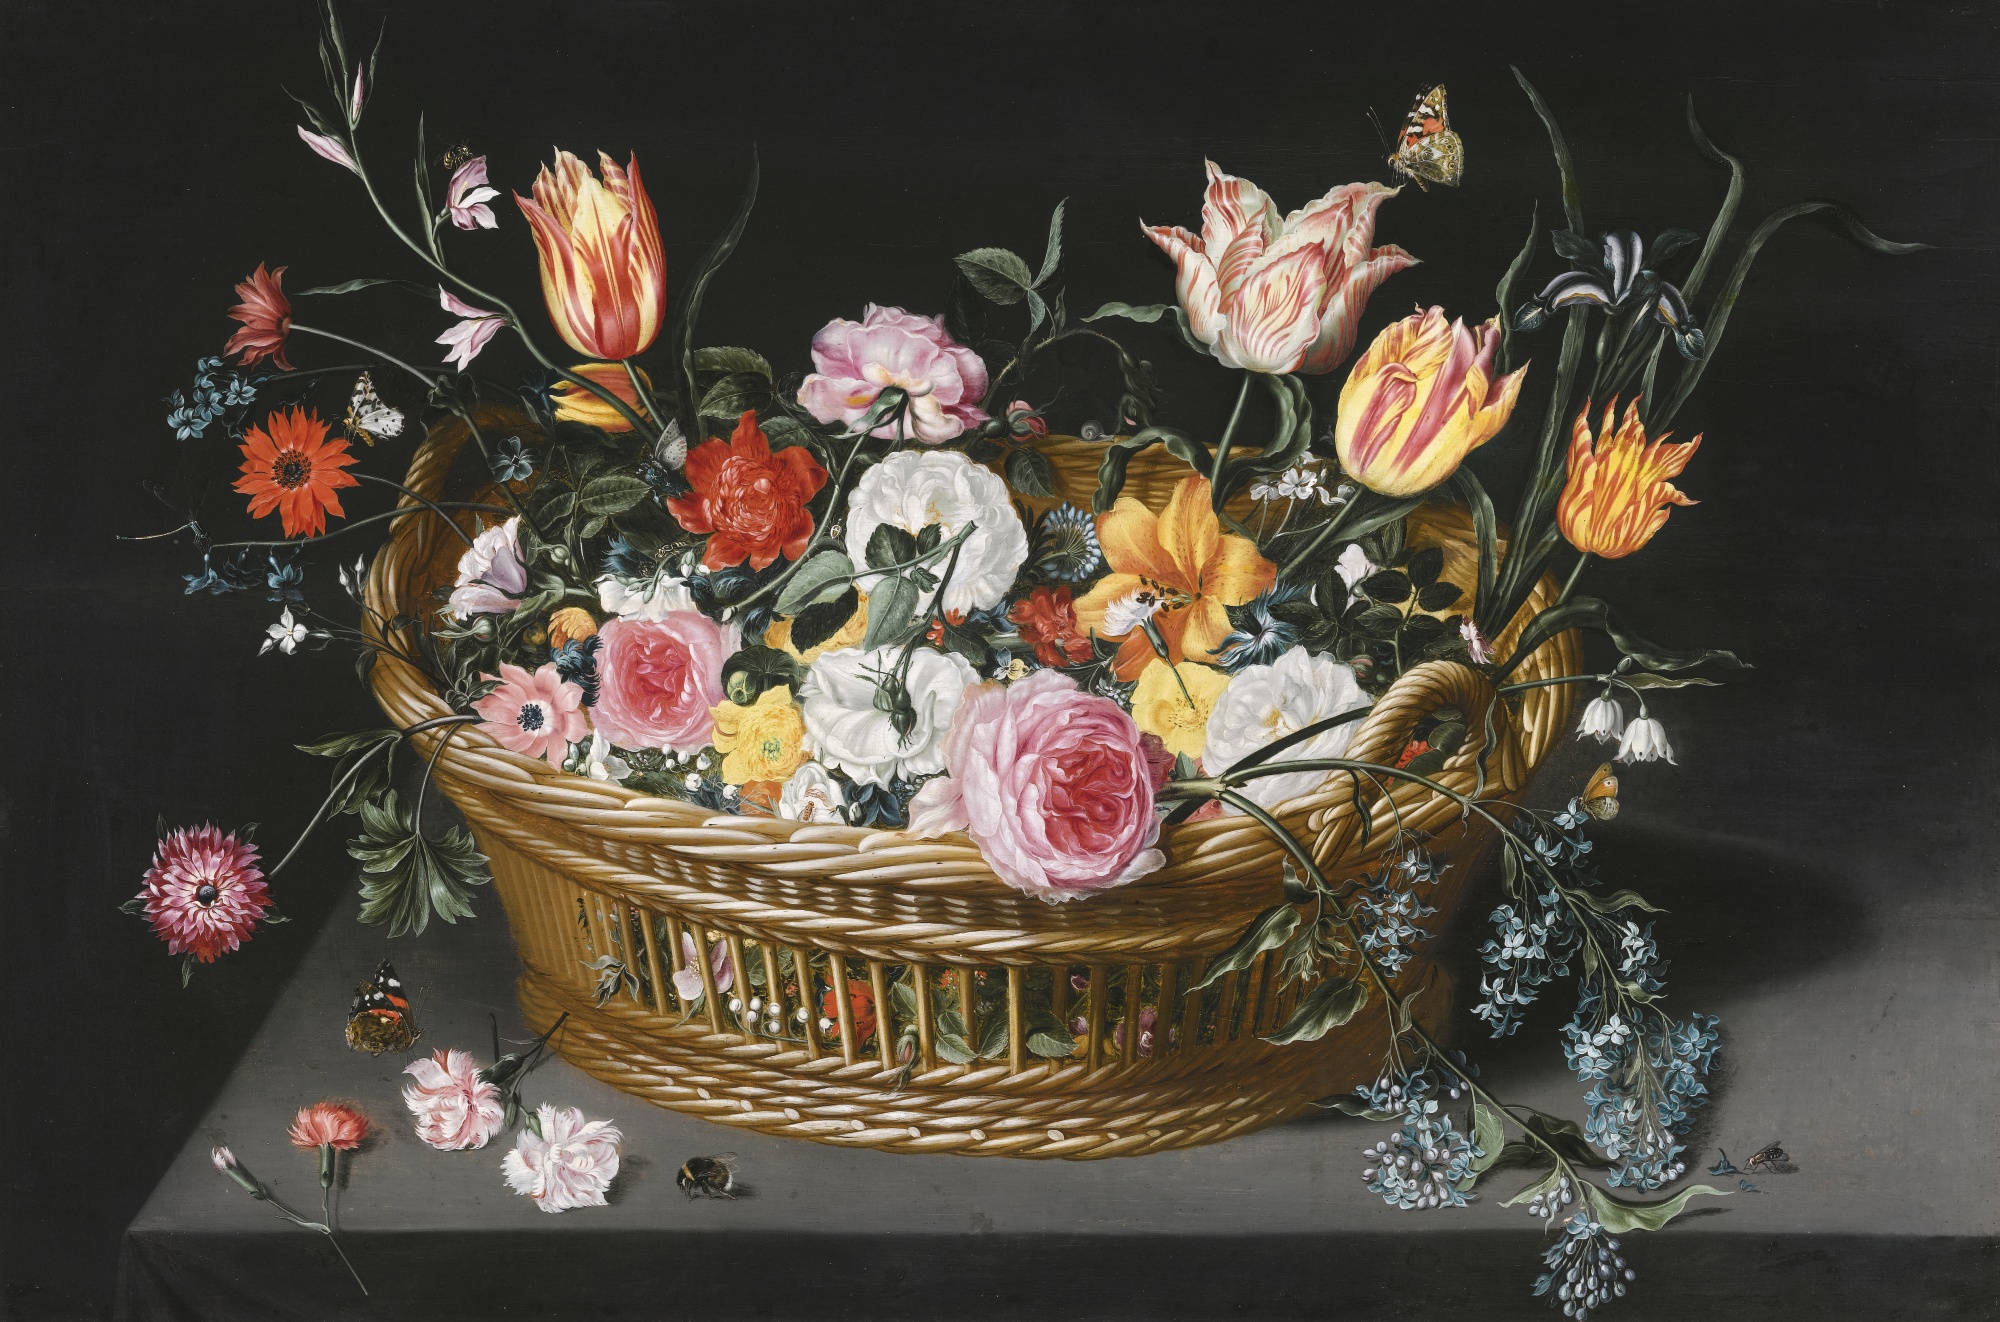 Still-life of Flowers in a Basket on a Stone Ledge by Jan Brueghel - 17th Century - 54.9 x 91.2 cm private collection